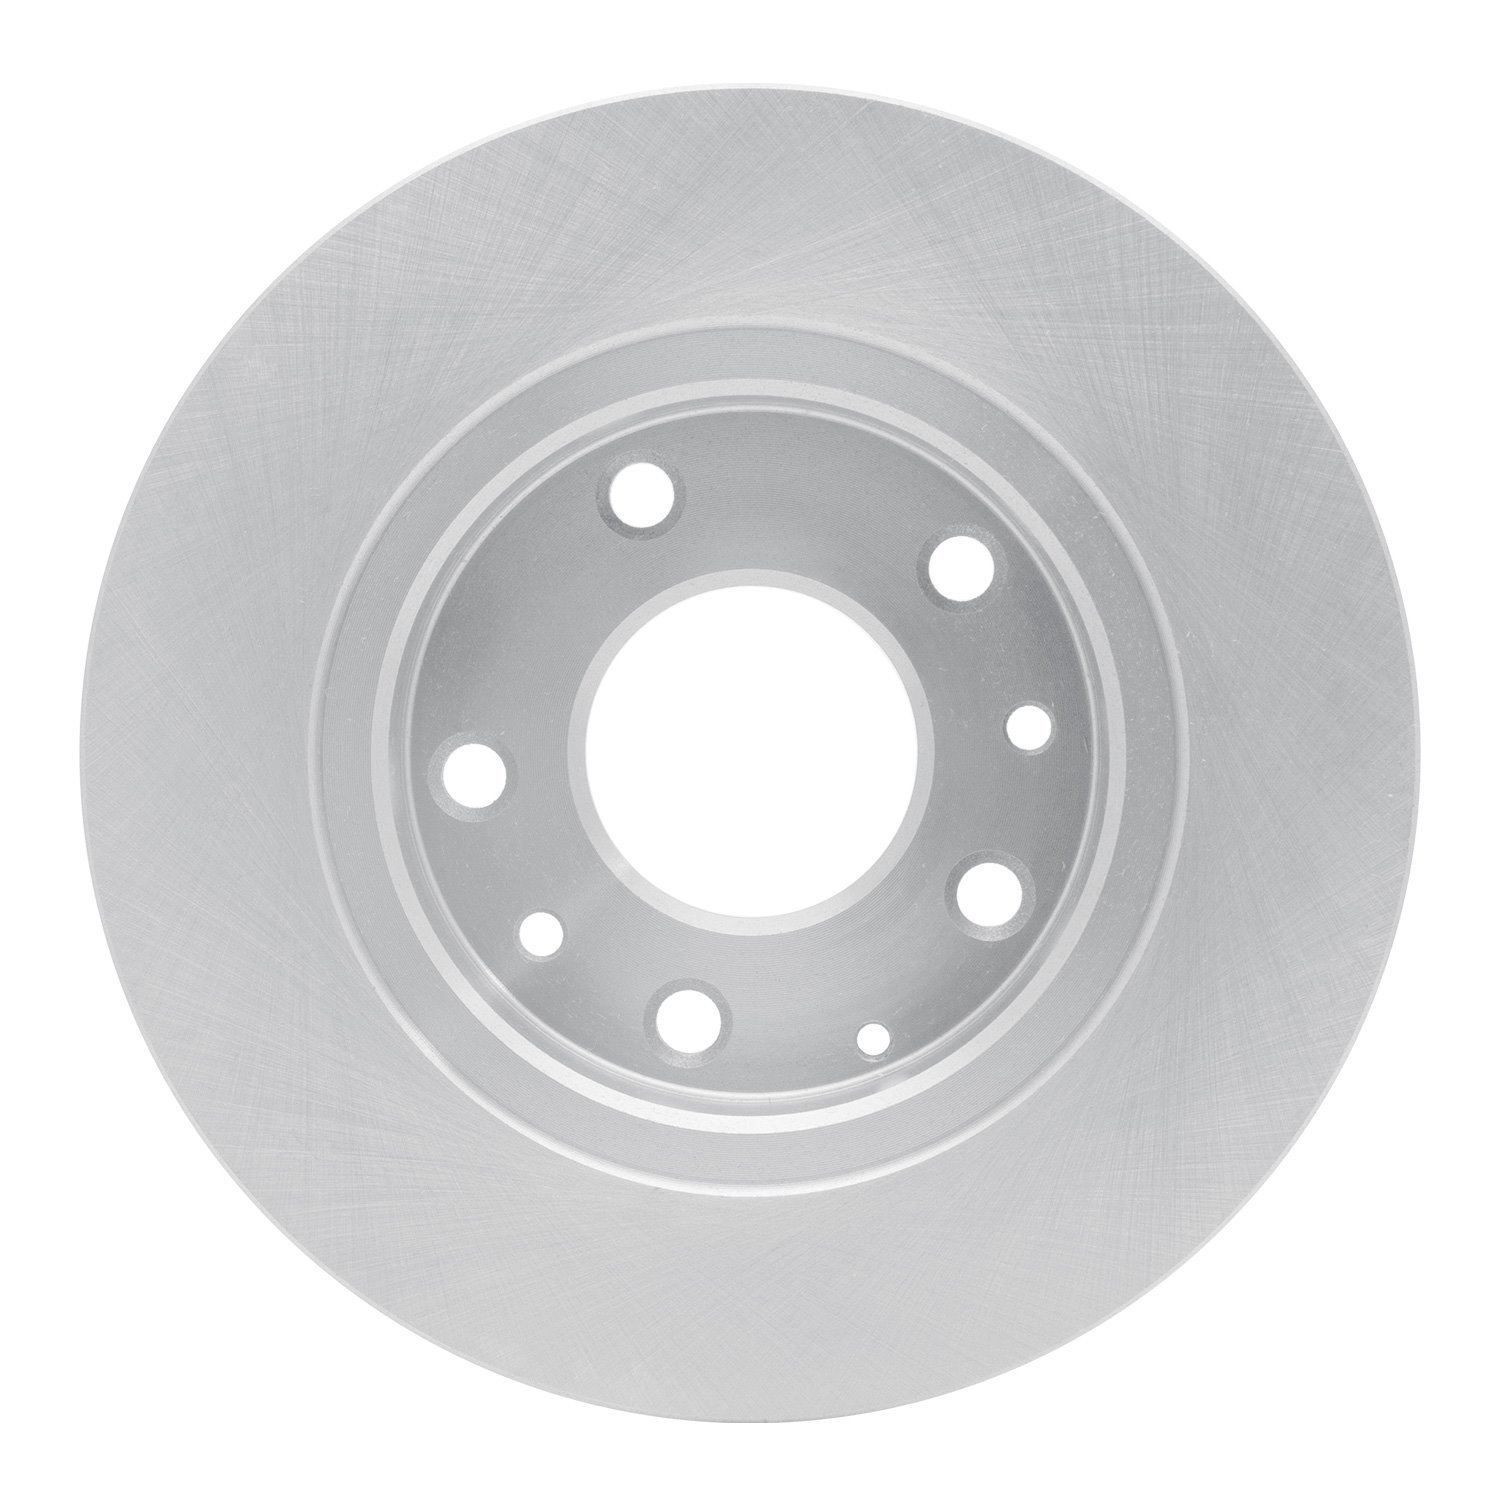 600-80079 Brake Rotor, Fits Select Ford/Lincoln/Mercury/Mazda, Position: Rear